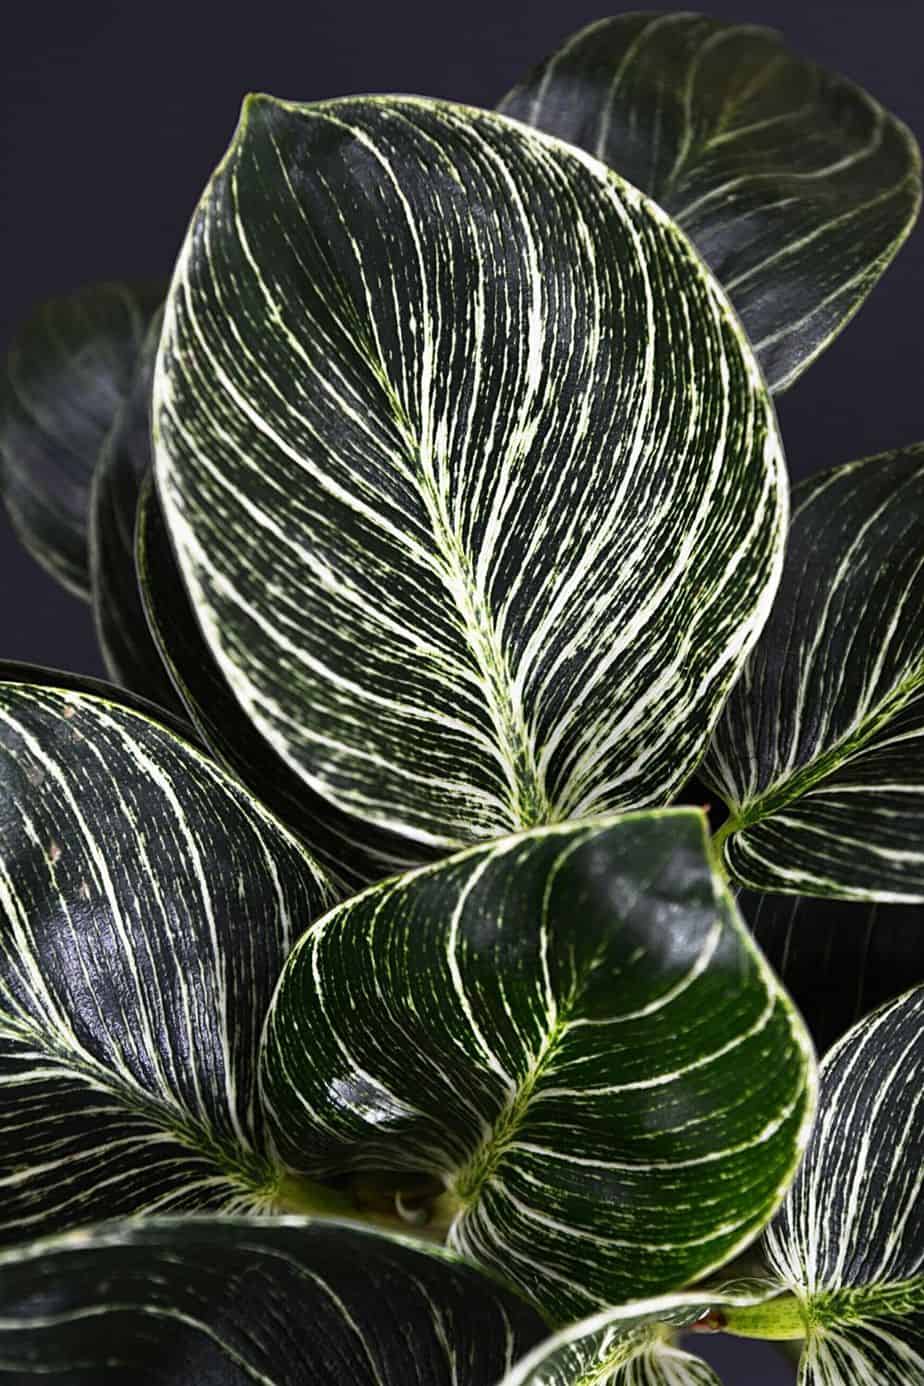 It's best to use a low-nitrogen fertilizer on your Philodendron Birkin to protect its white variegation